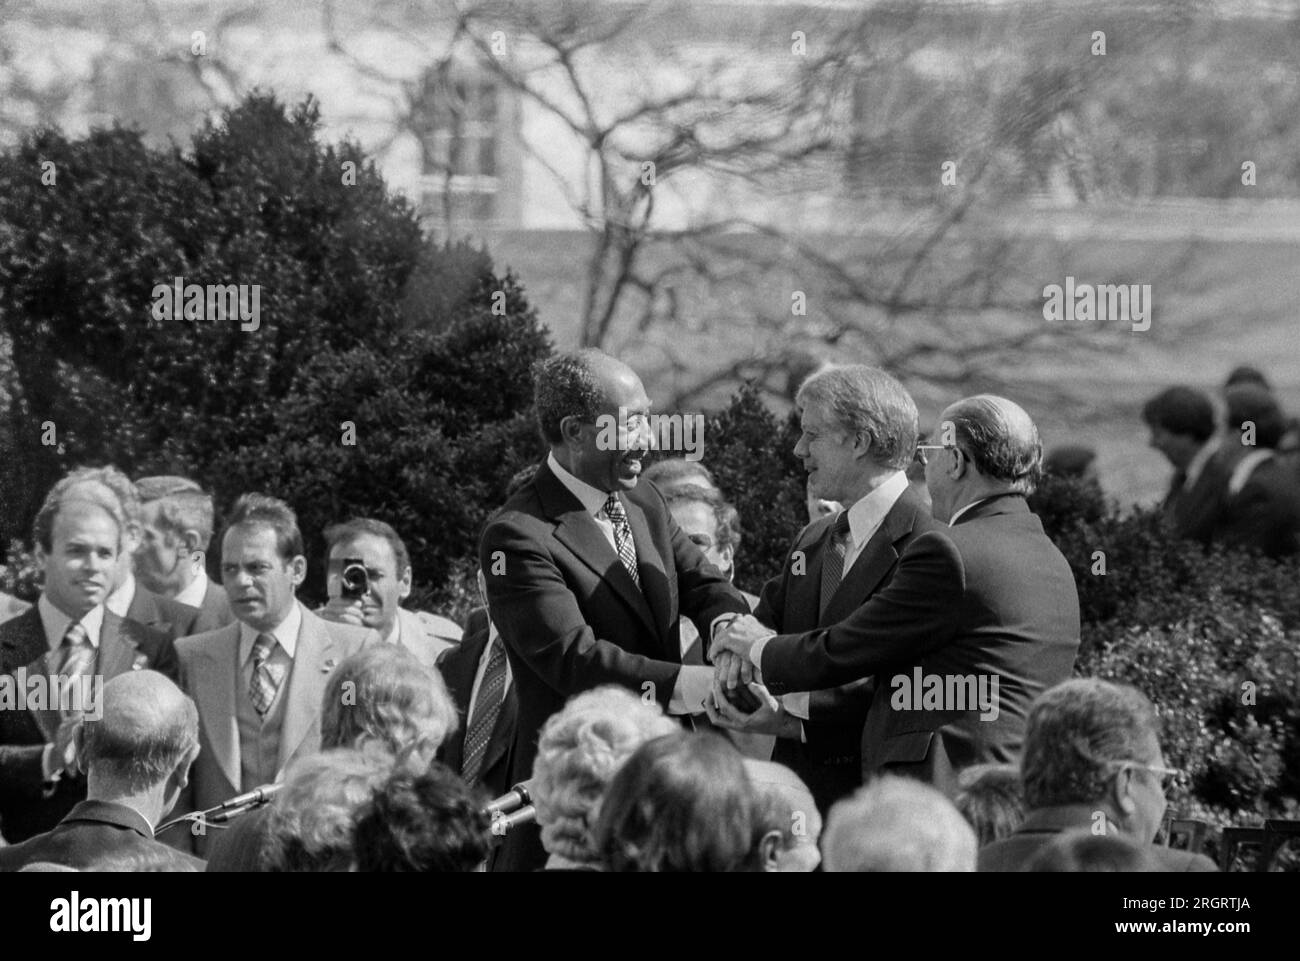 Washington, D.C.:  March 26, 1979 President Jimmy Carter shaking hands with Egyptian President Anwar Sadat and Israeli Prime Minister Menachem Begin at the signing of the Egyptian-Israeli Peace Treaty on the grounds of the White House. Stock Photo